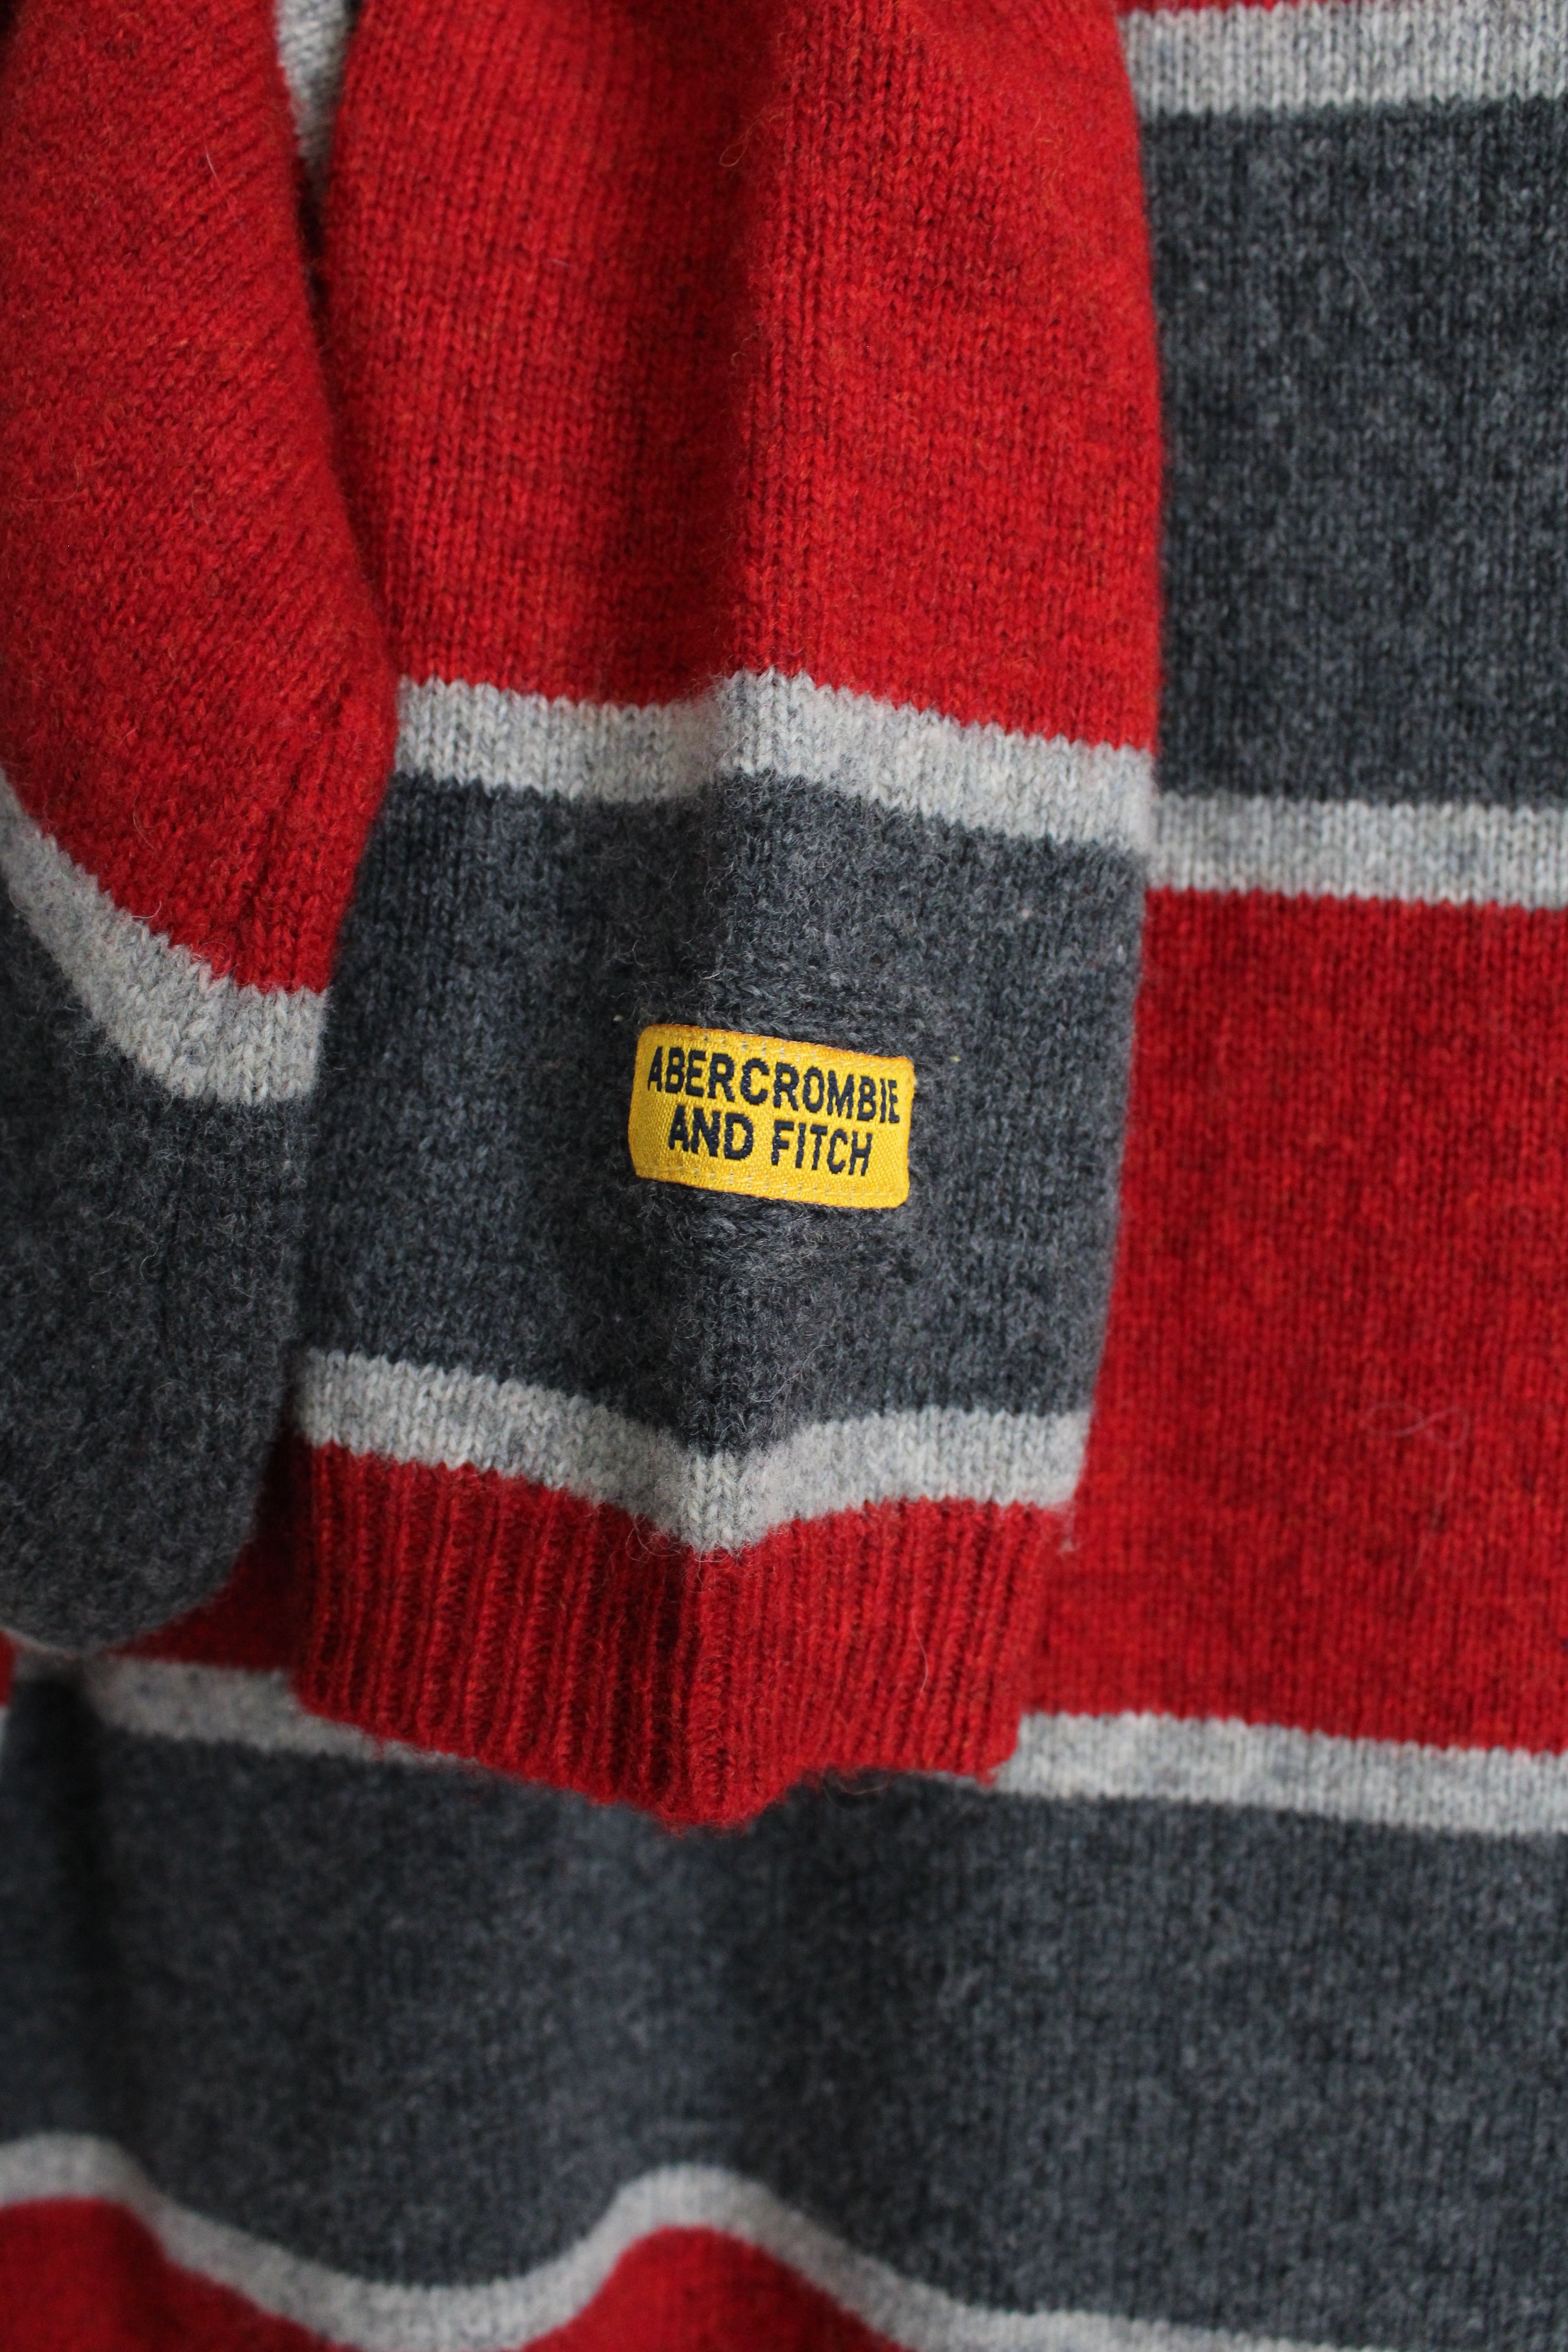 Abercrombie & Fitch Vintage Lambswool Red Gray Striped Sweater | L